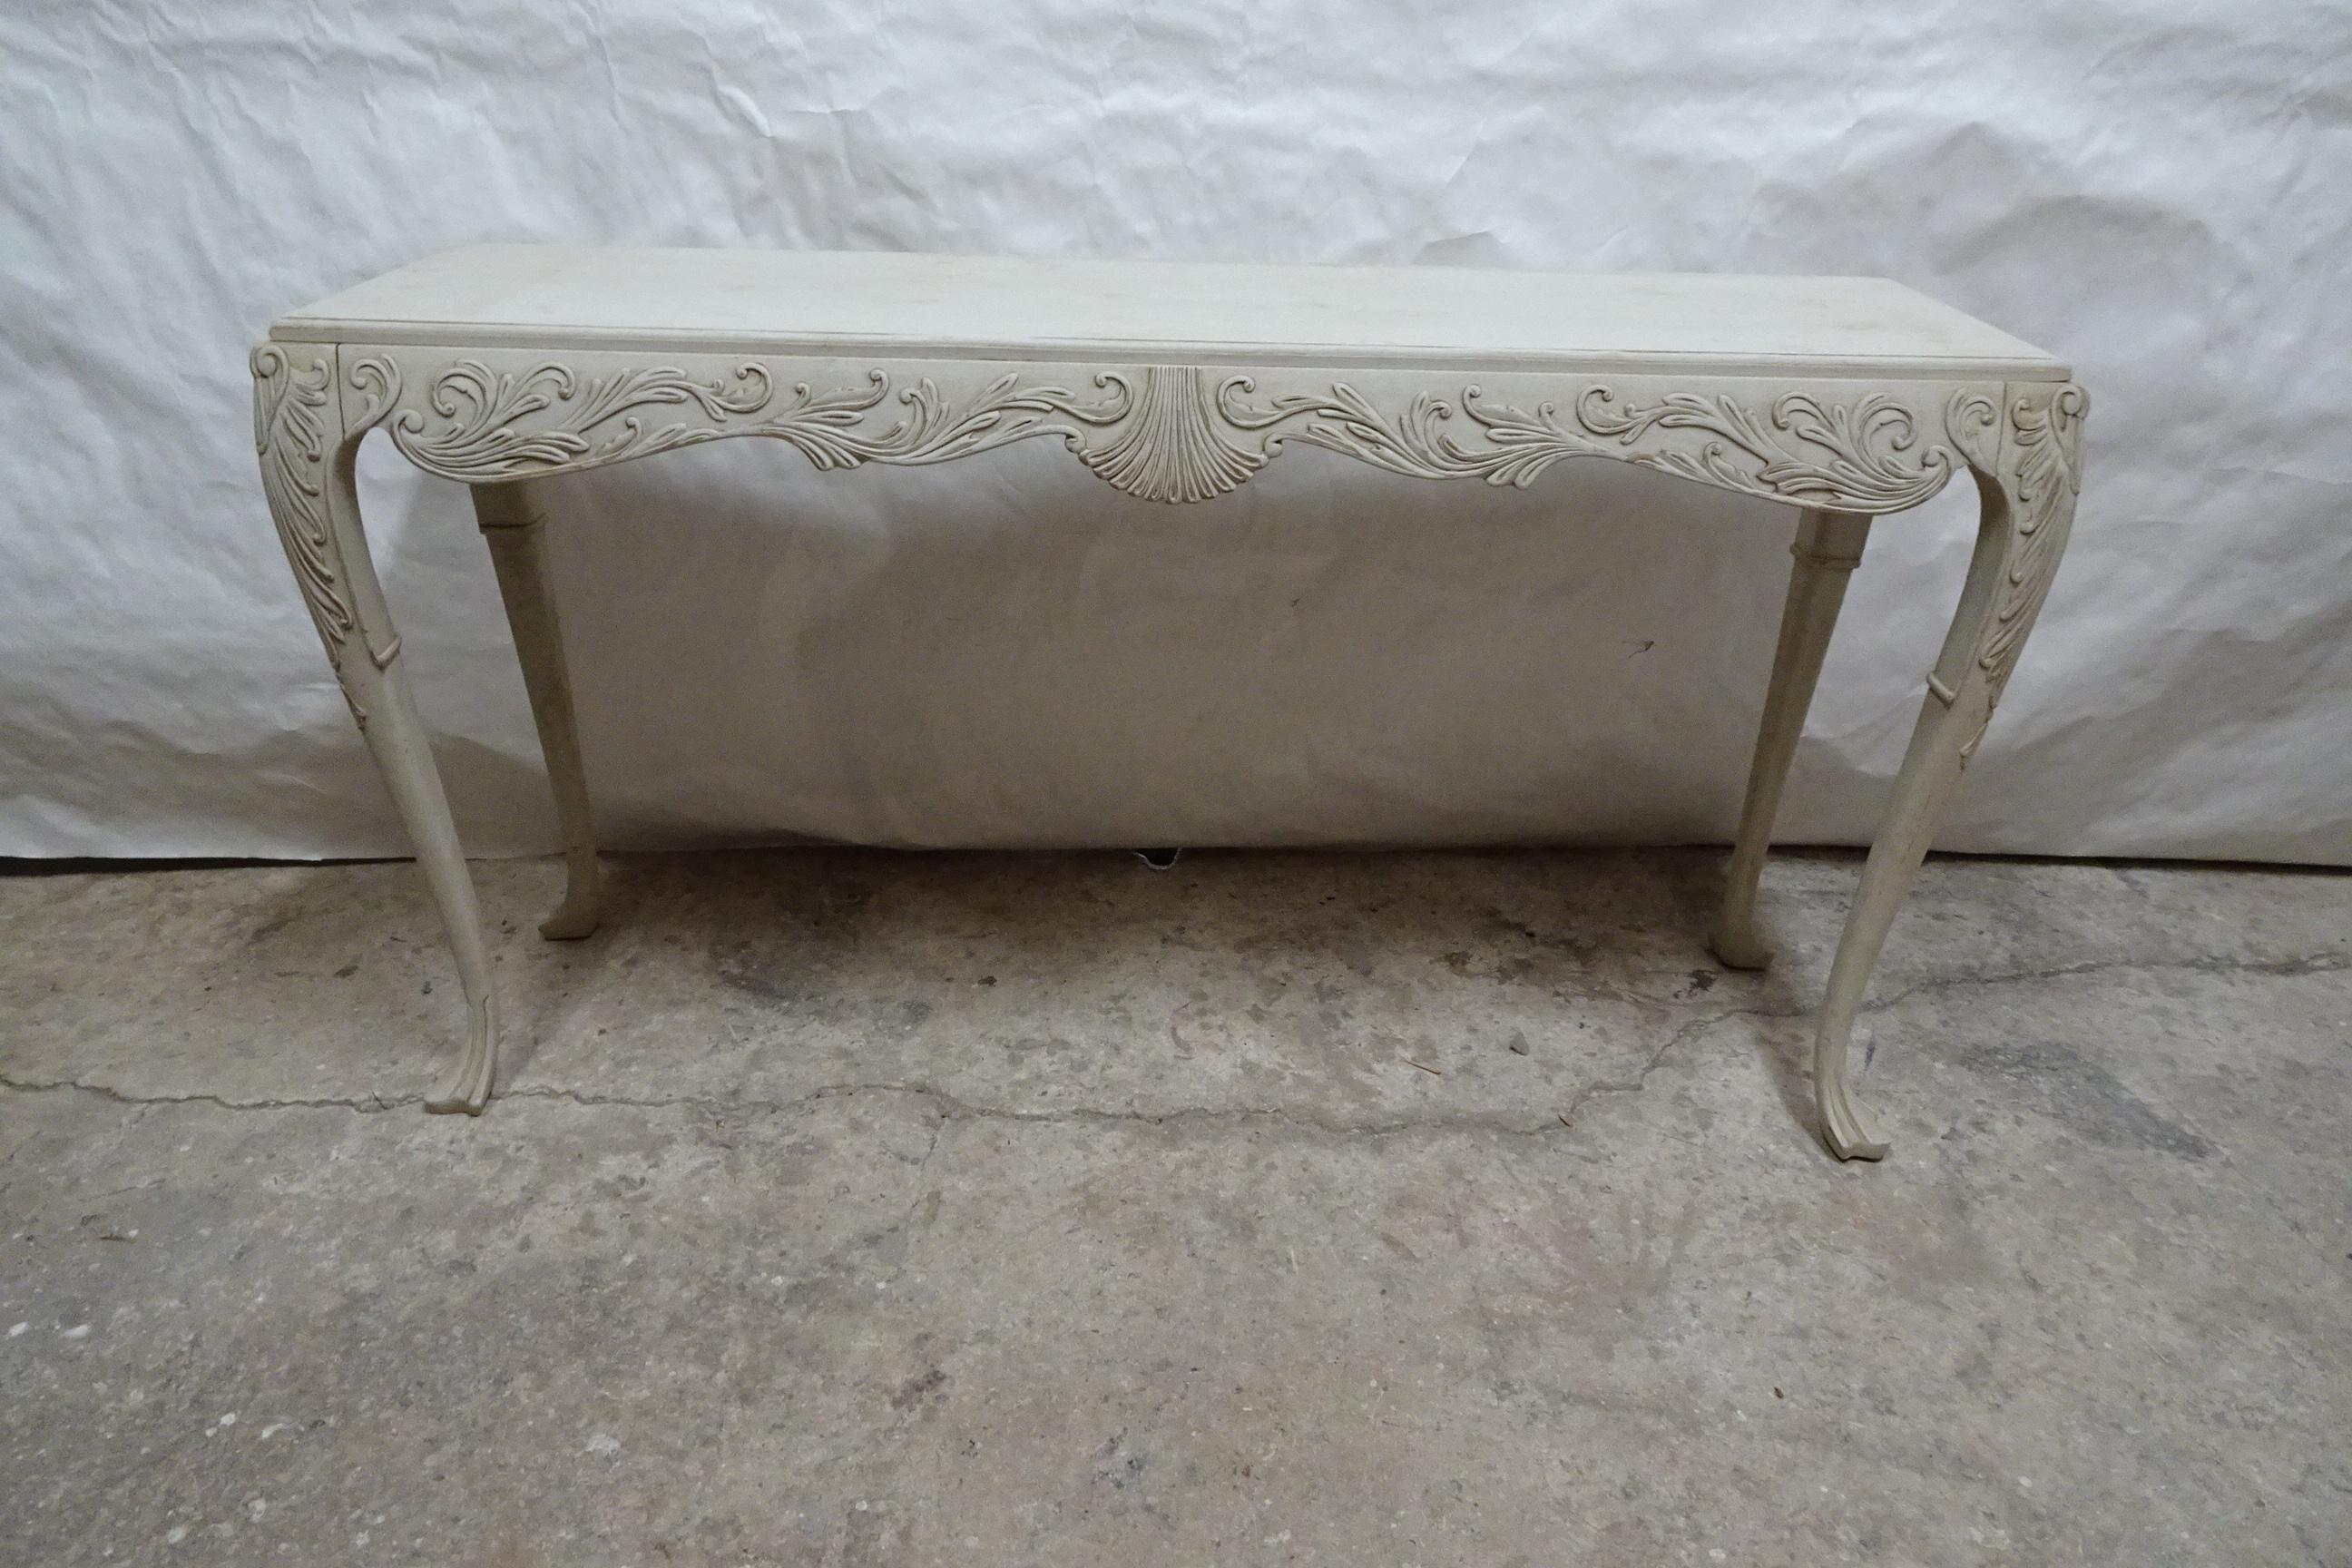 This is a unique Swedish Rococo Style Console Table, its been restored and repainted with Milk Paints 